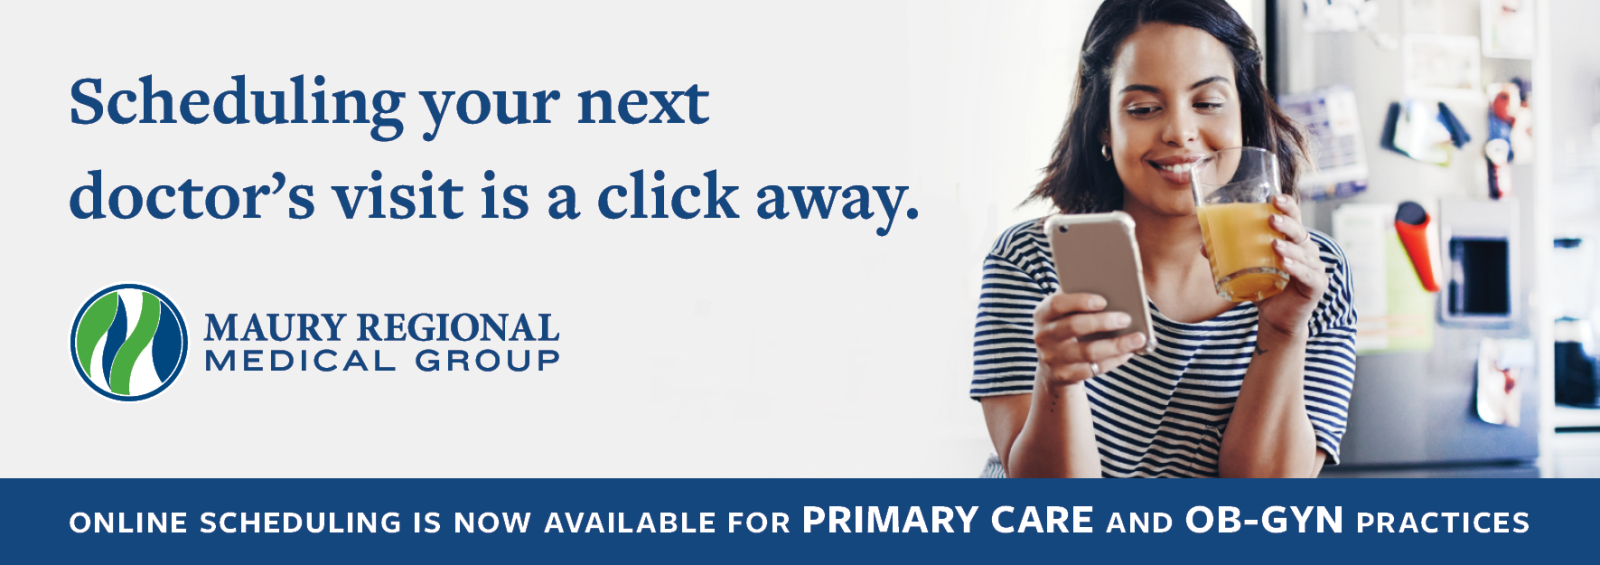 Girl using a cell phone. Text reads, "Schedule your next appointment online -- no phone calls required. Online scheduling is now available for primary care and OB-GYN visits.